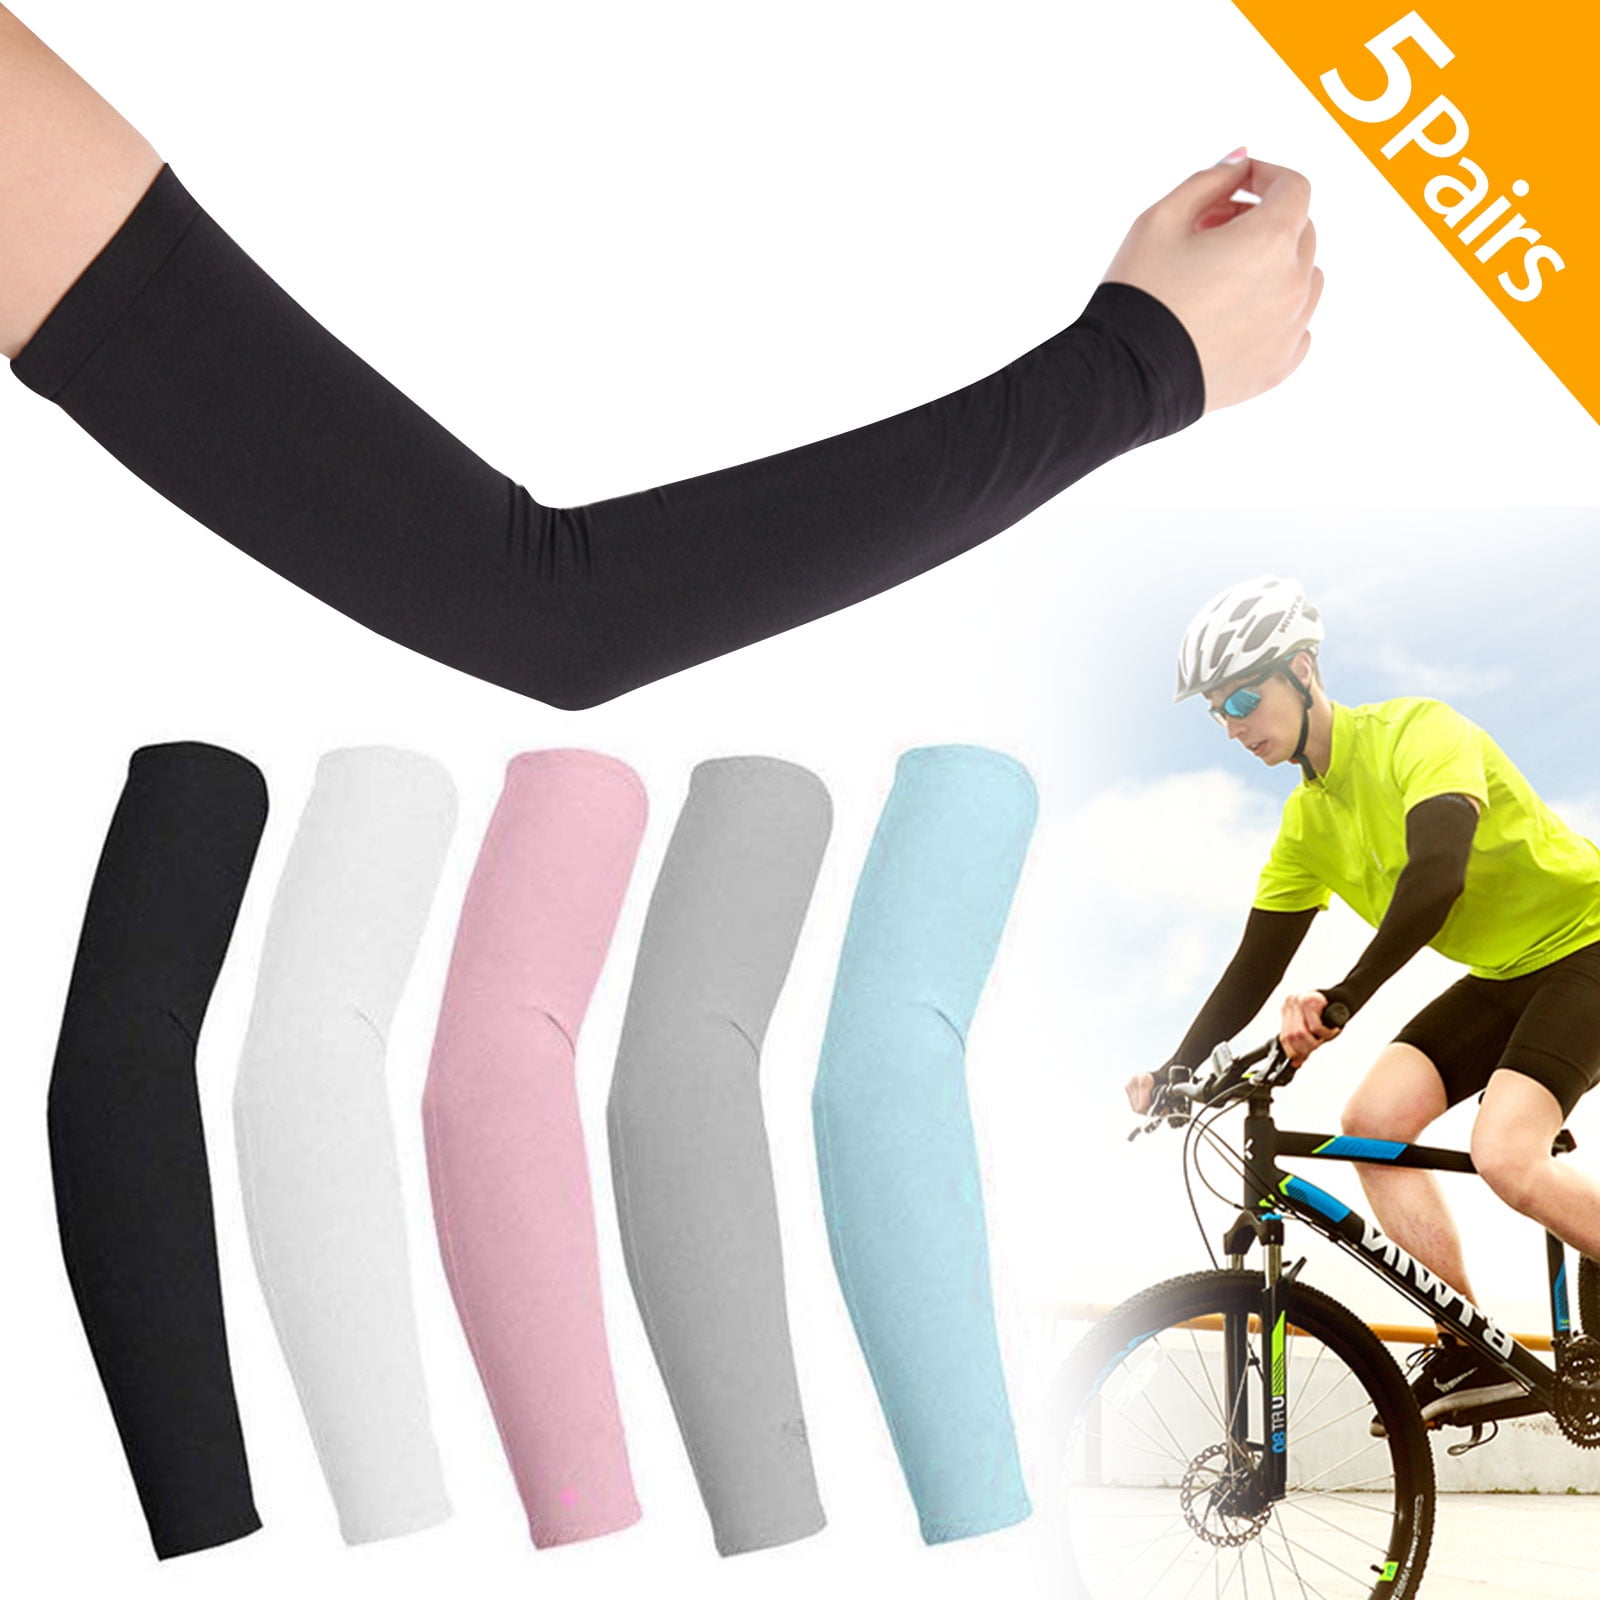 5Pairs Cooling Arm Sleeves Cover UV Sun Protection For Men Women Unisex 